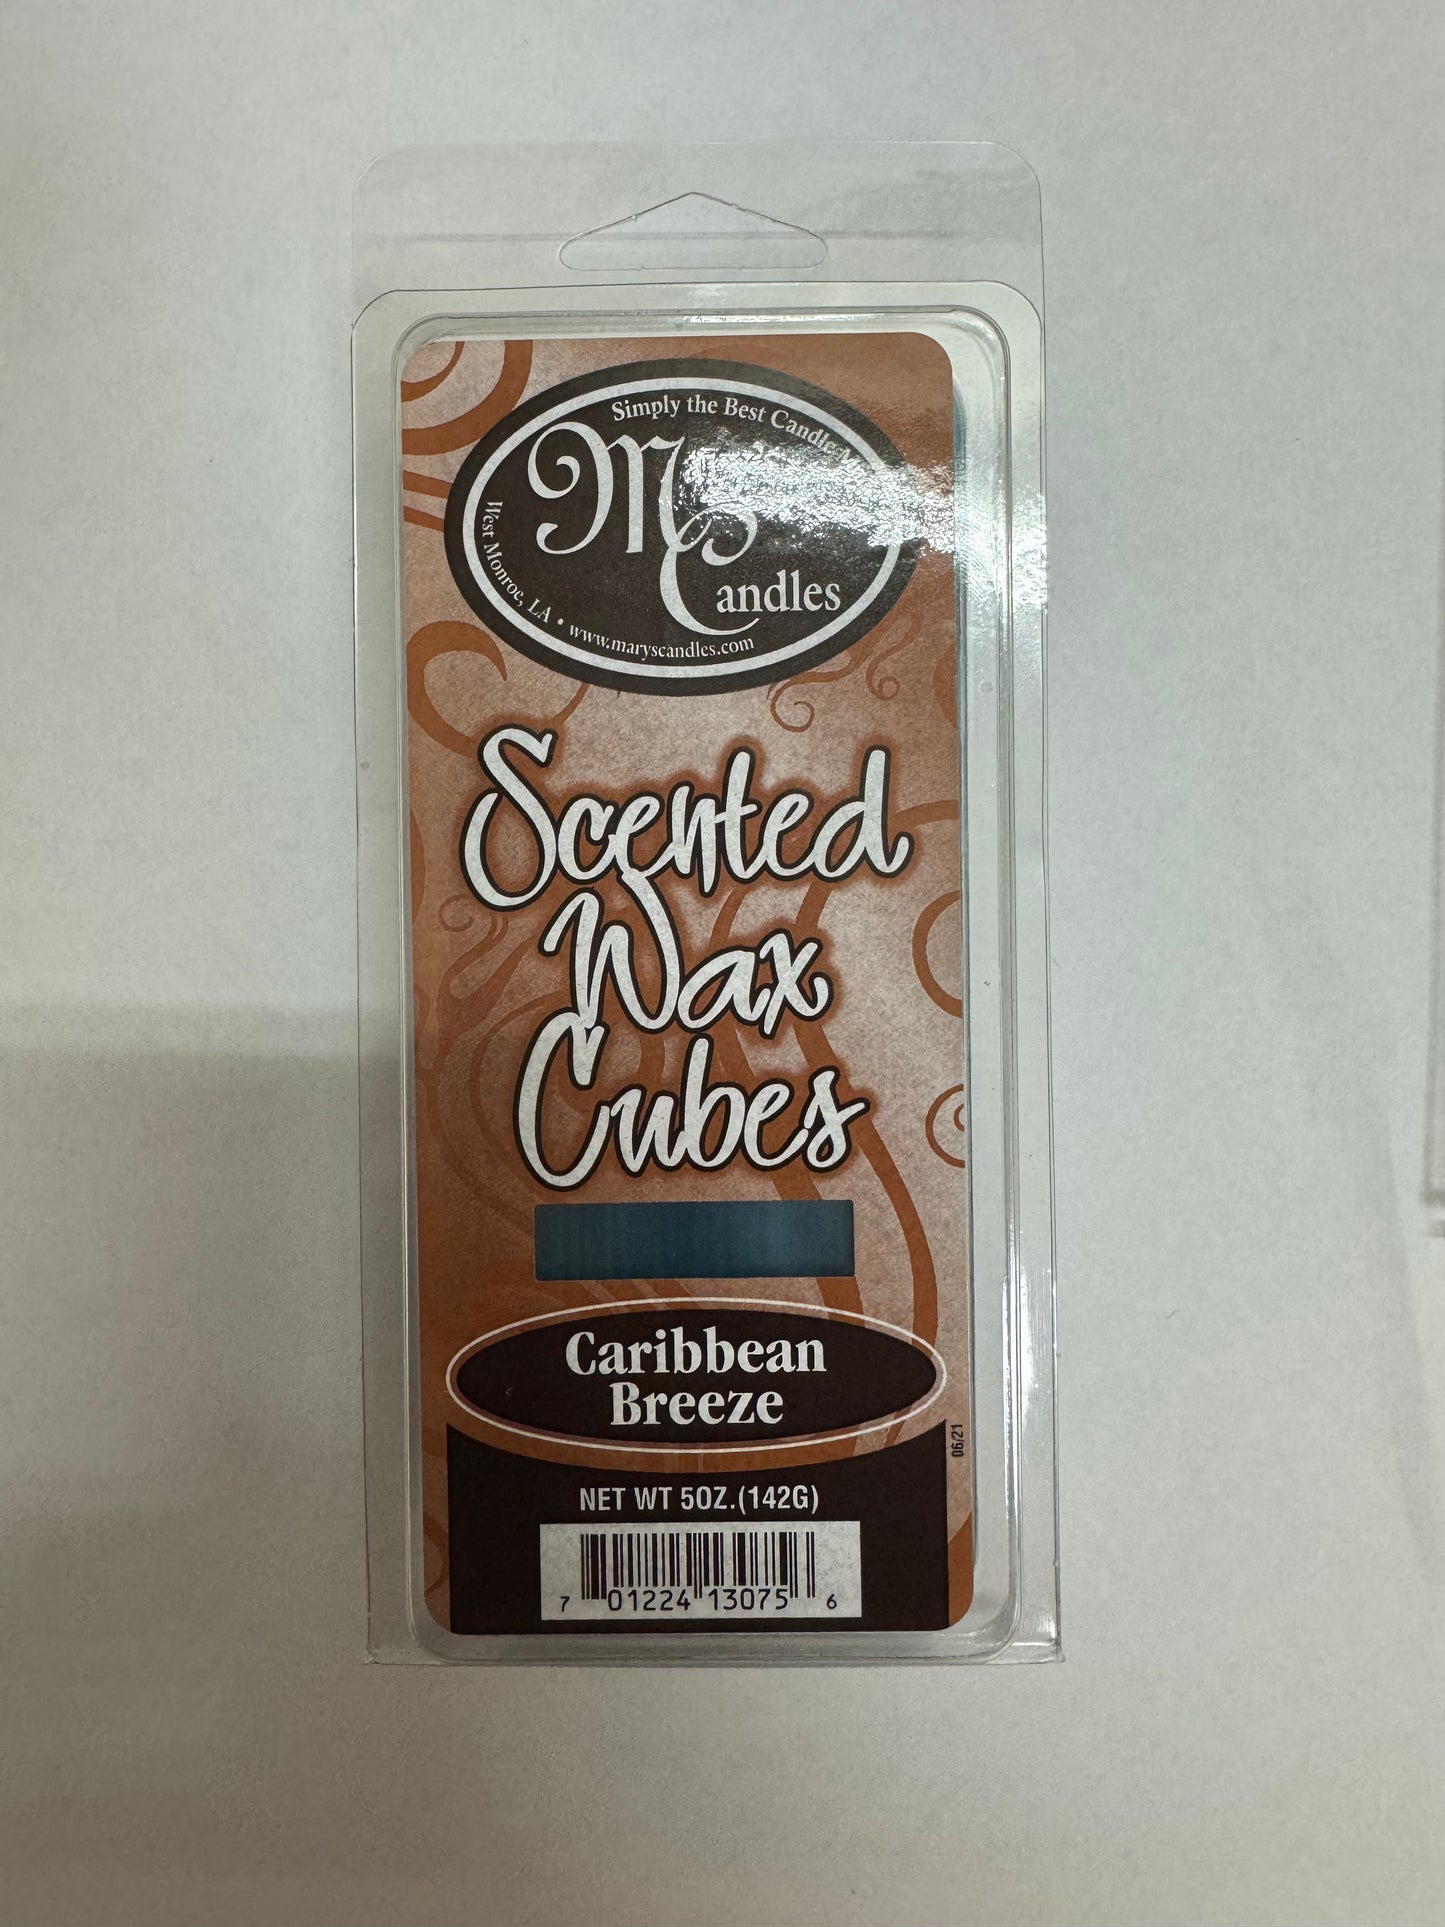 Mary's Candles Caribbean Breeze Wax Cubes